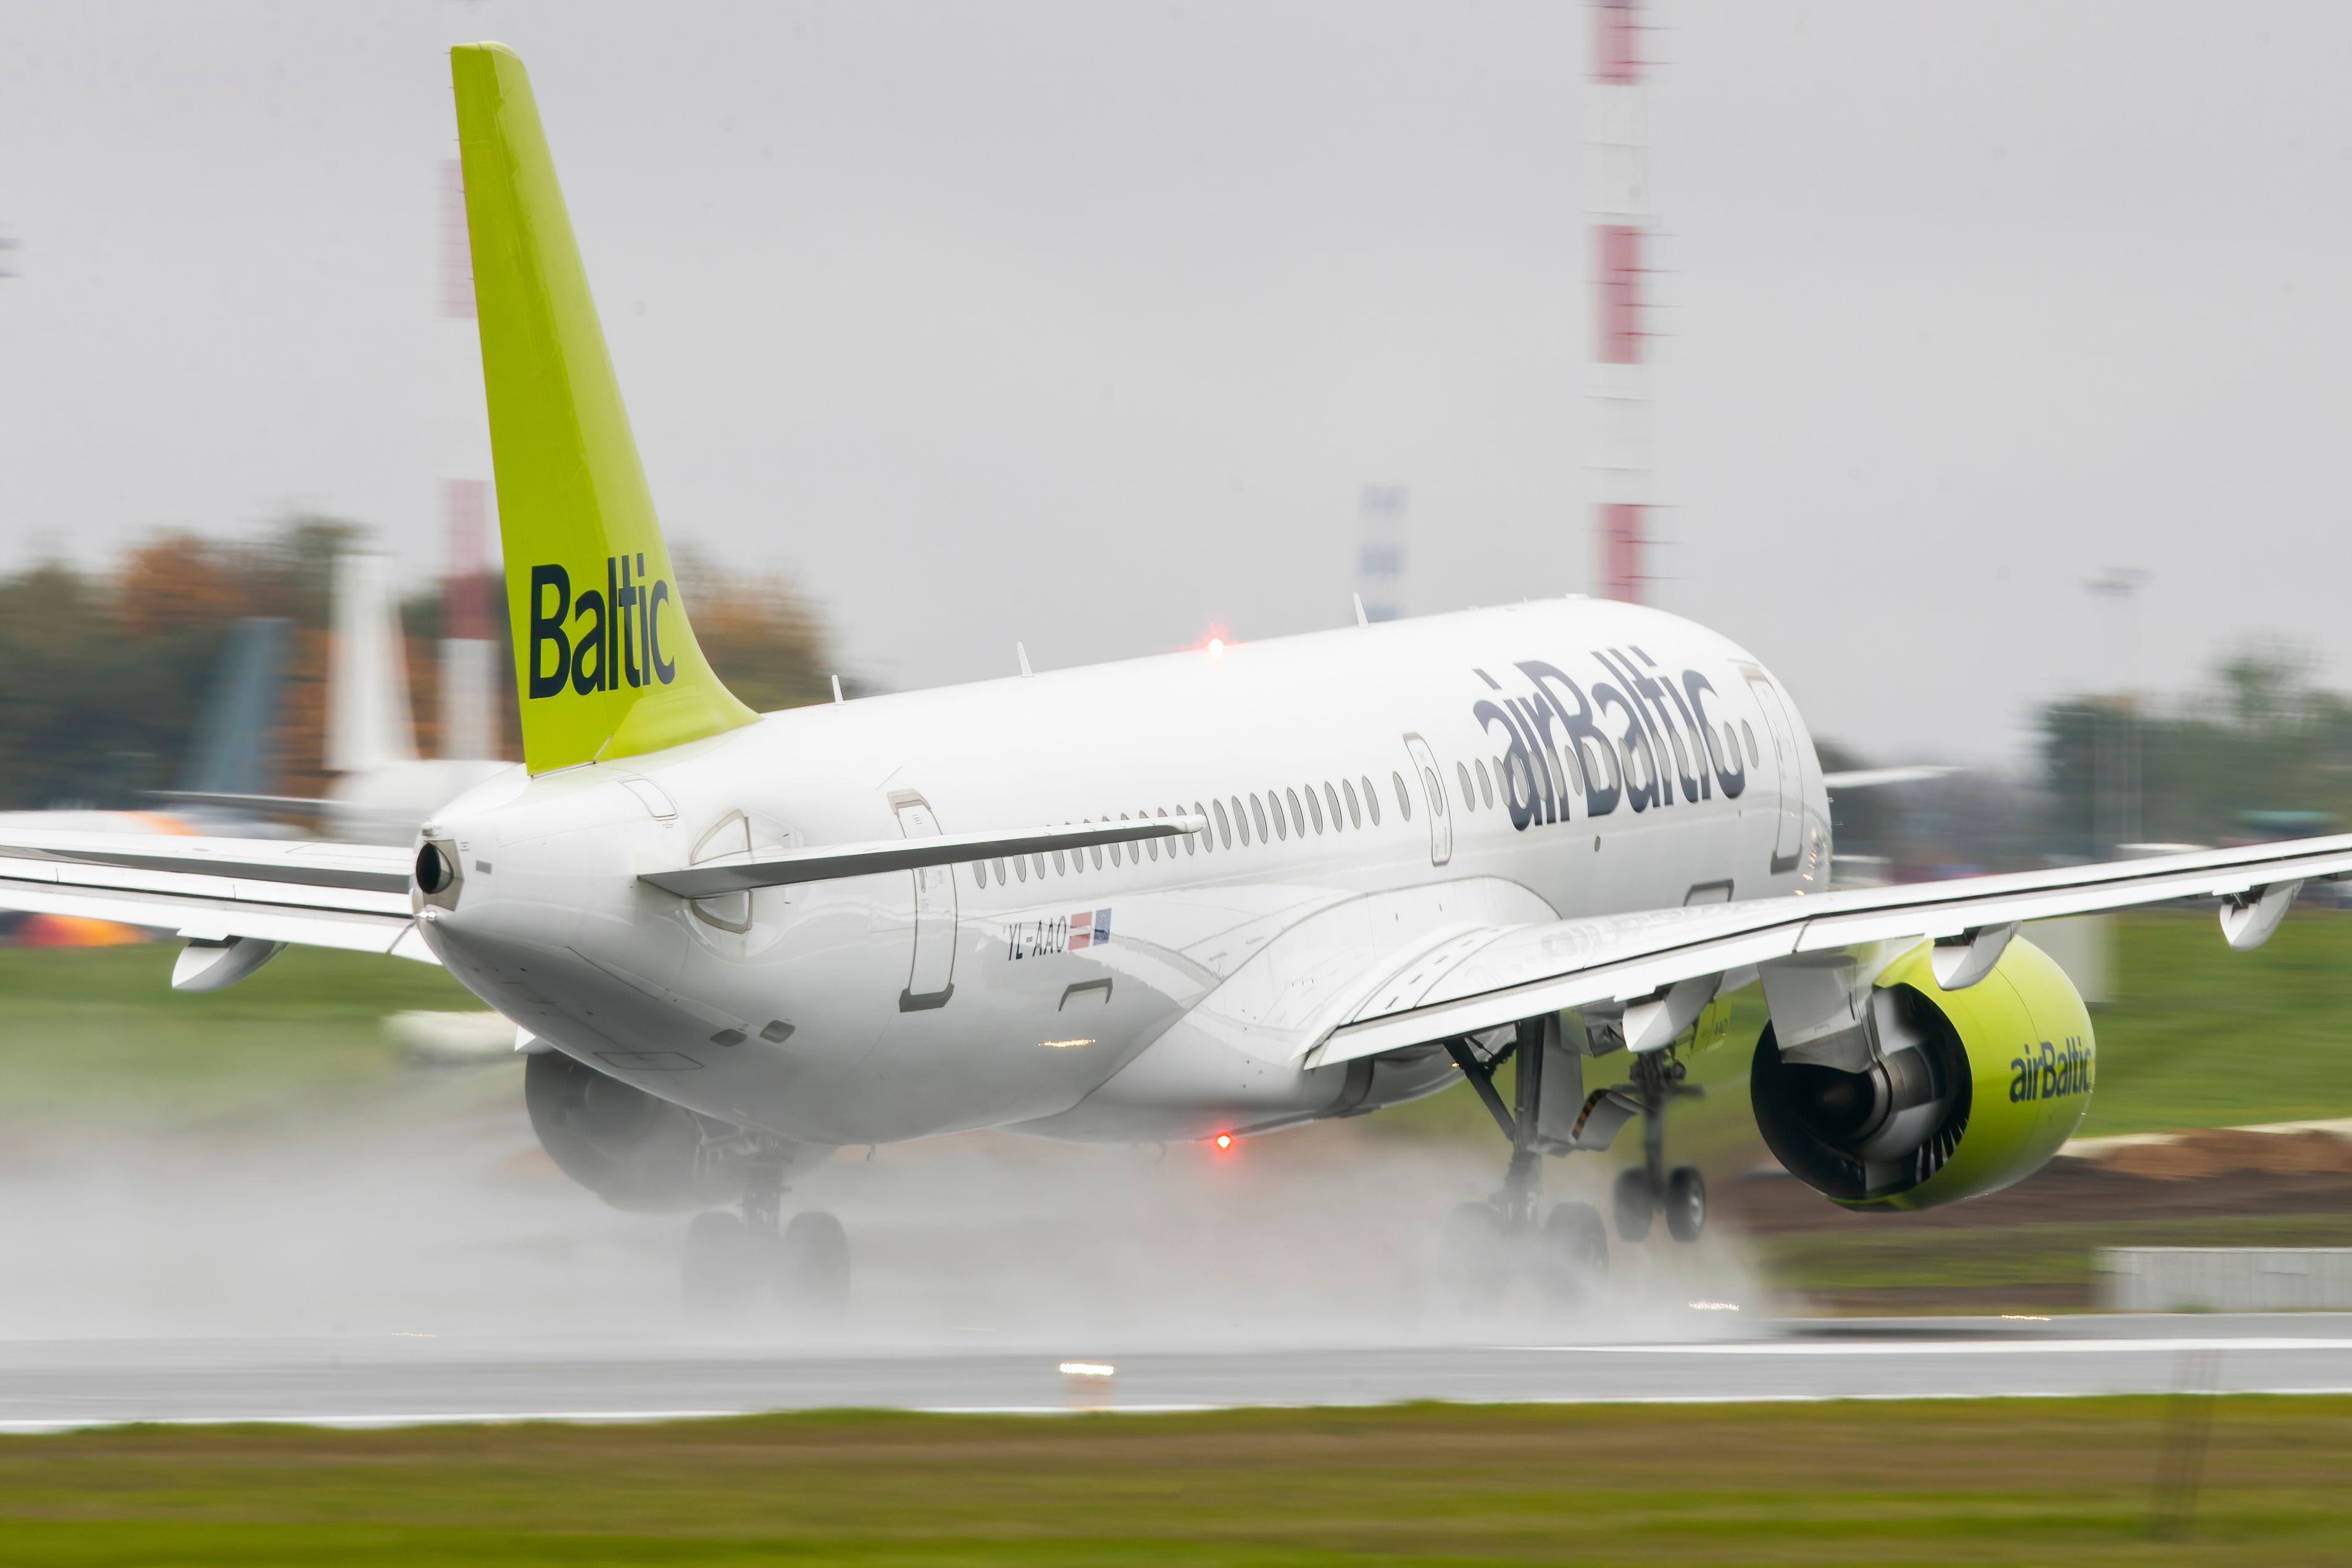 airBaltic Airbus A220-300 departing shutterstock_1832775808